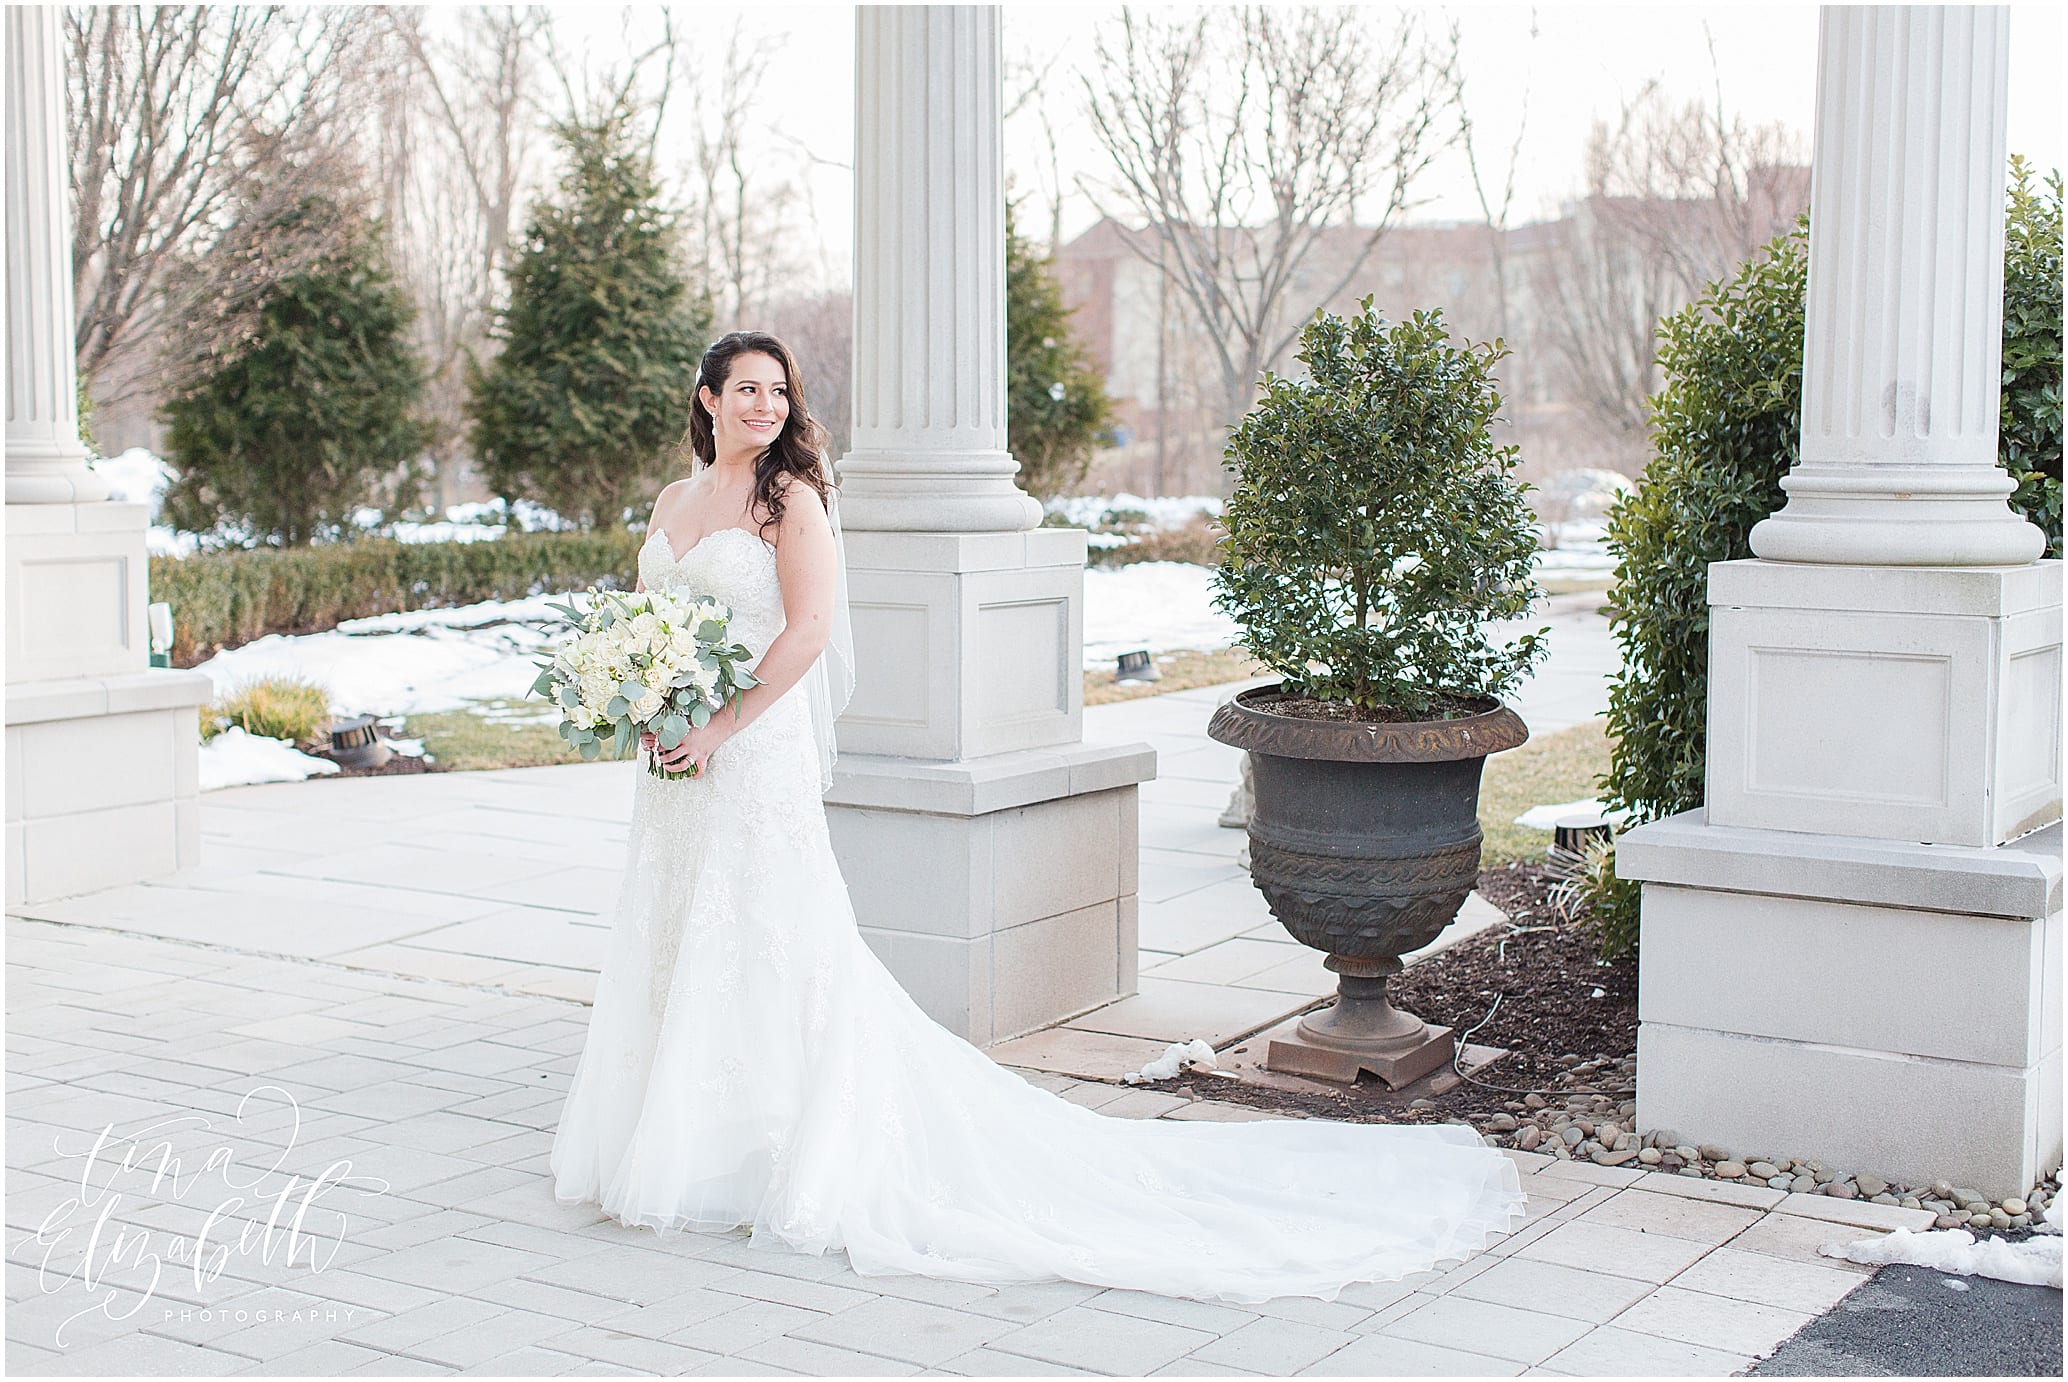 Winter bridal portrait - The Palace at Somerset Park winter wedding by Tina Elizabeth Photography